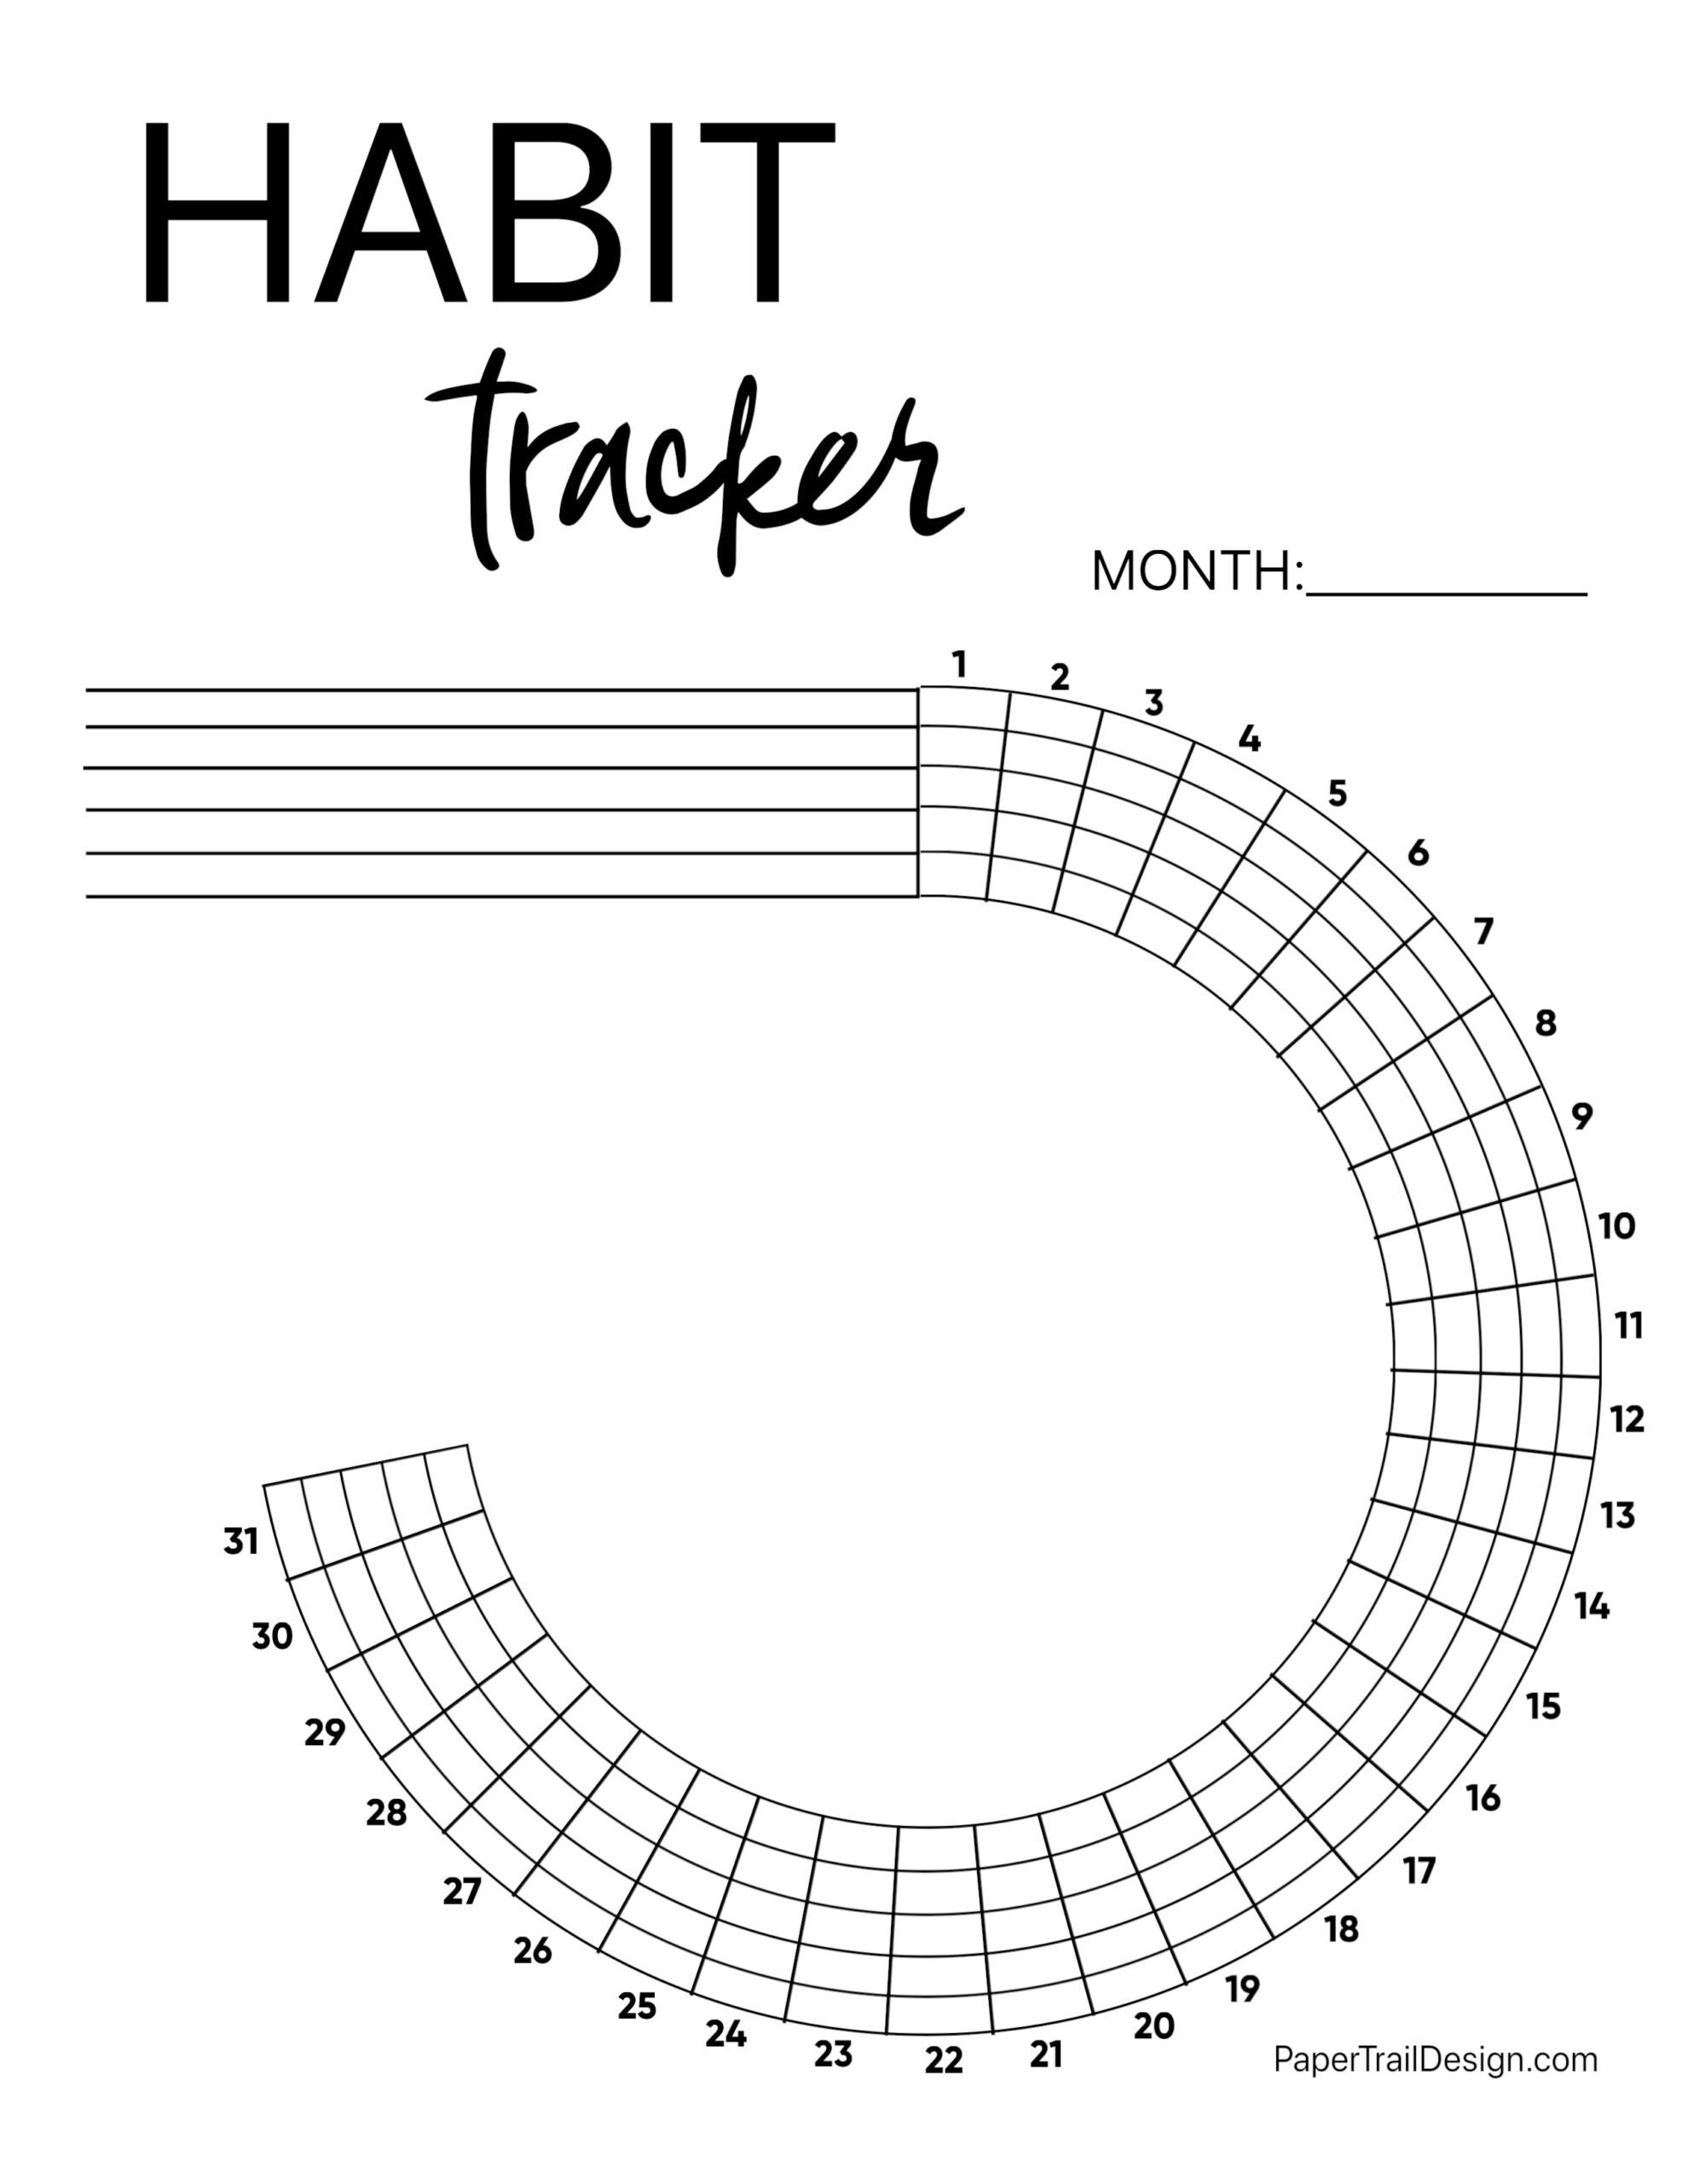 Paper & Party Supplies Circular Habit Tracker 30 days Daily Habit